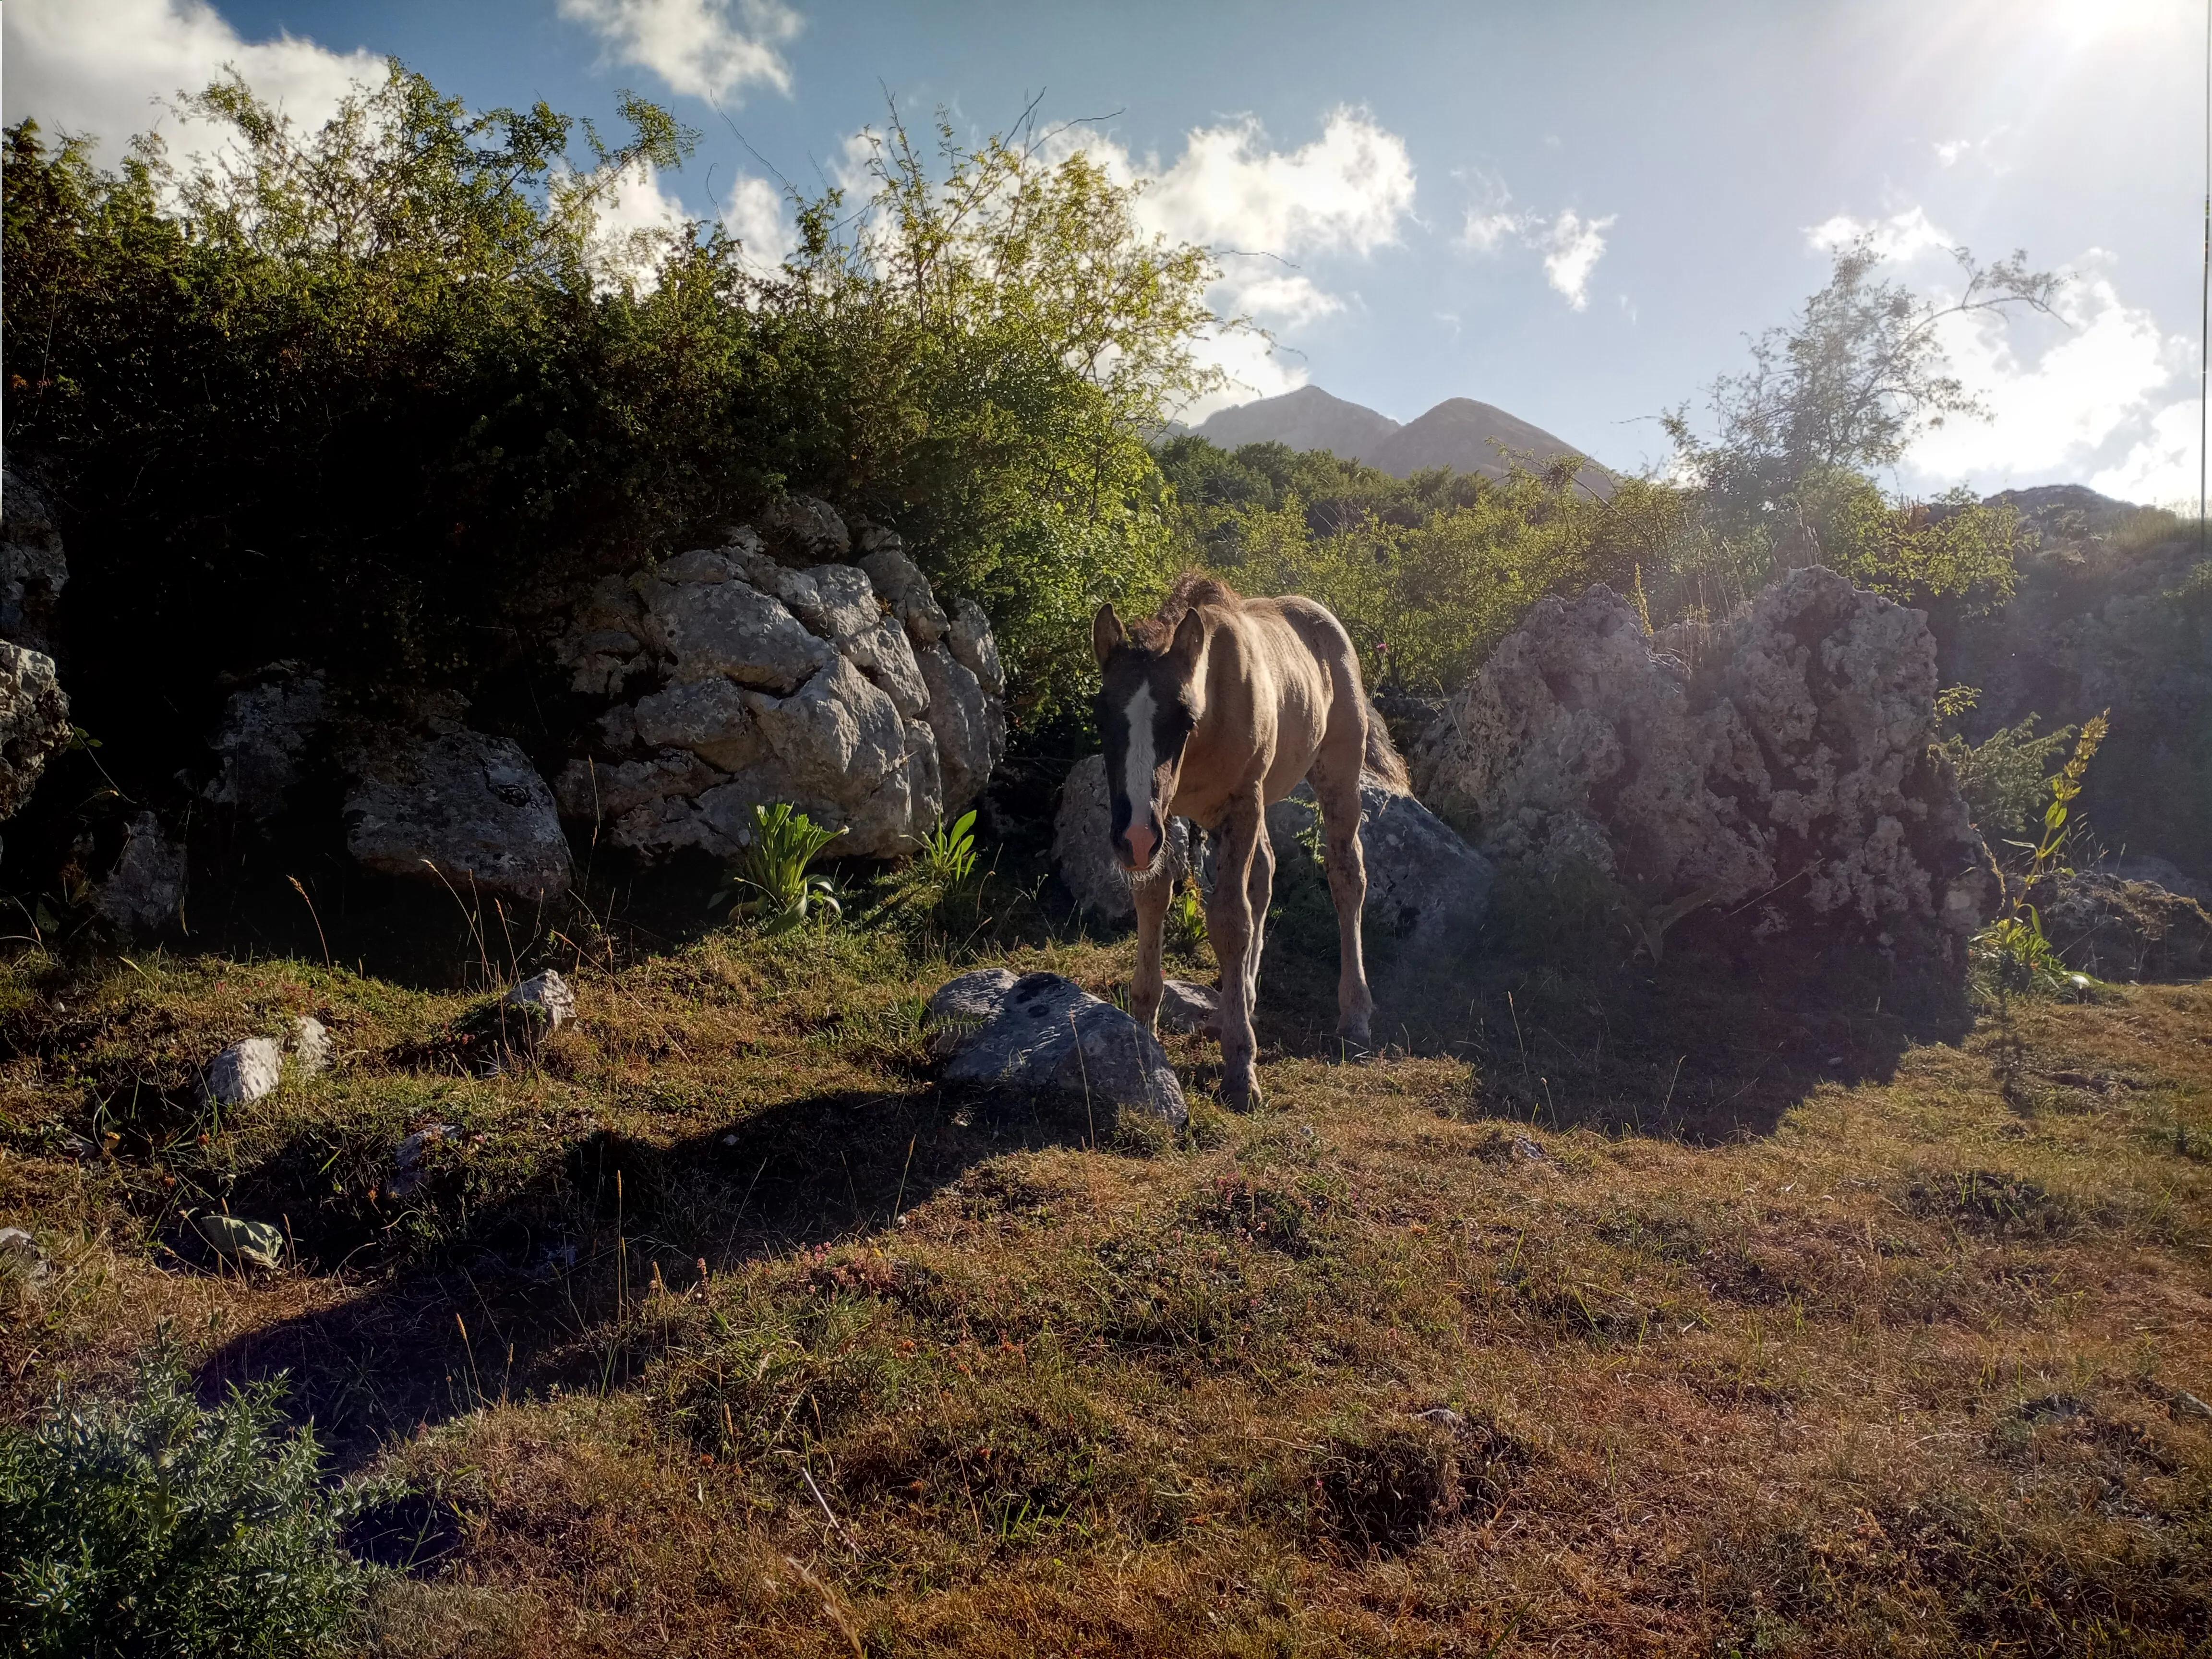 A horse is seen standing in front of rocks in front of mountainous area